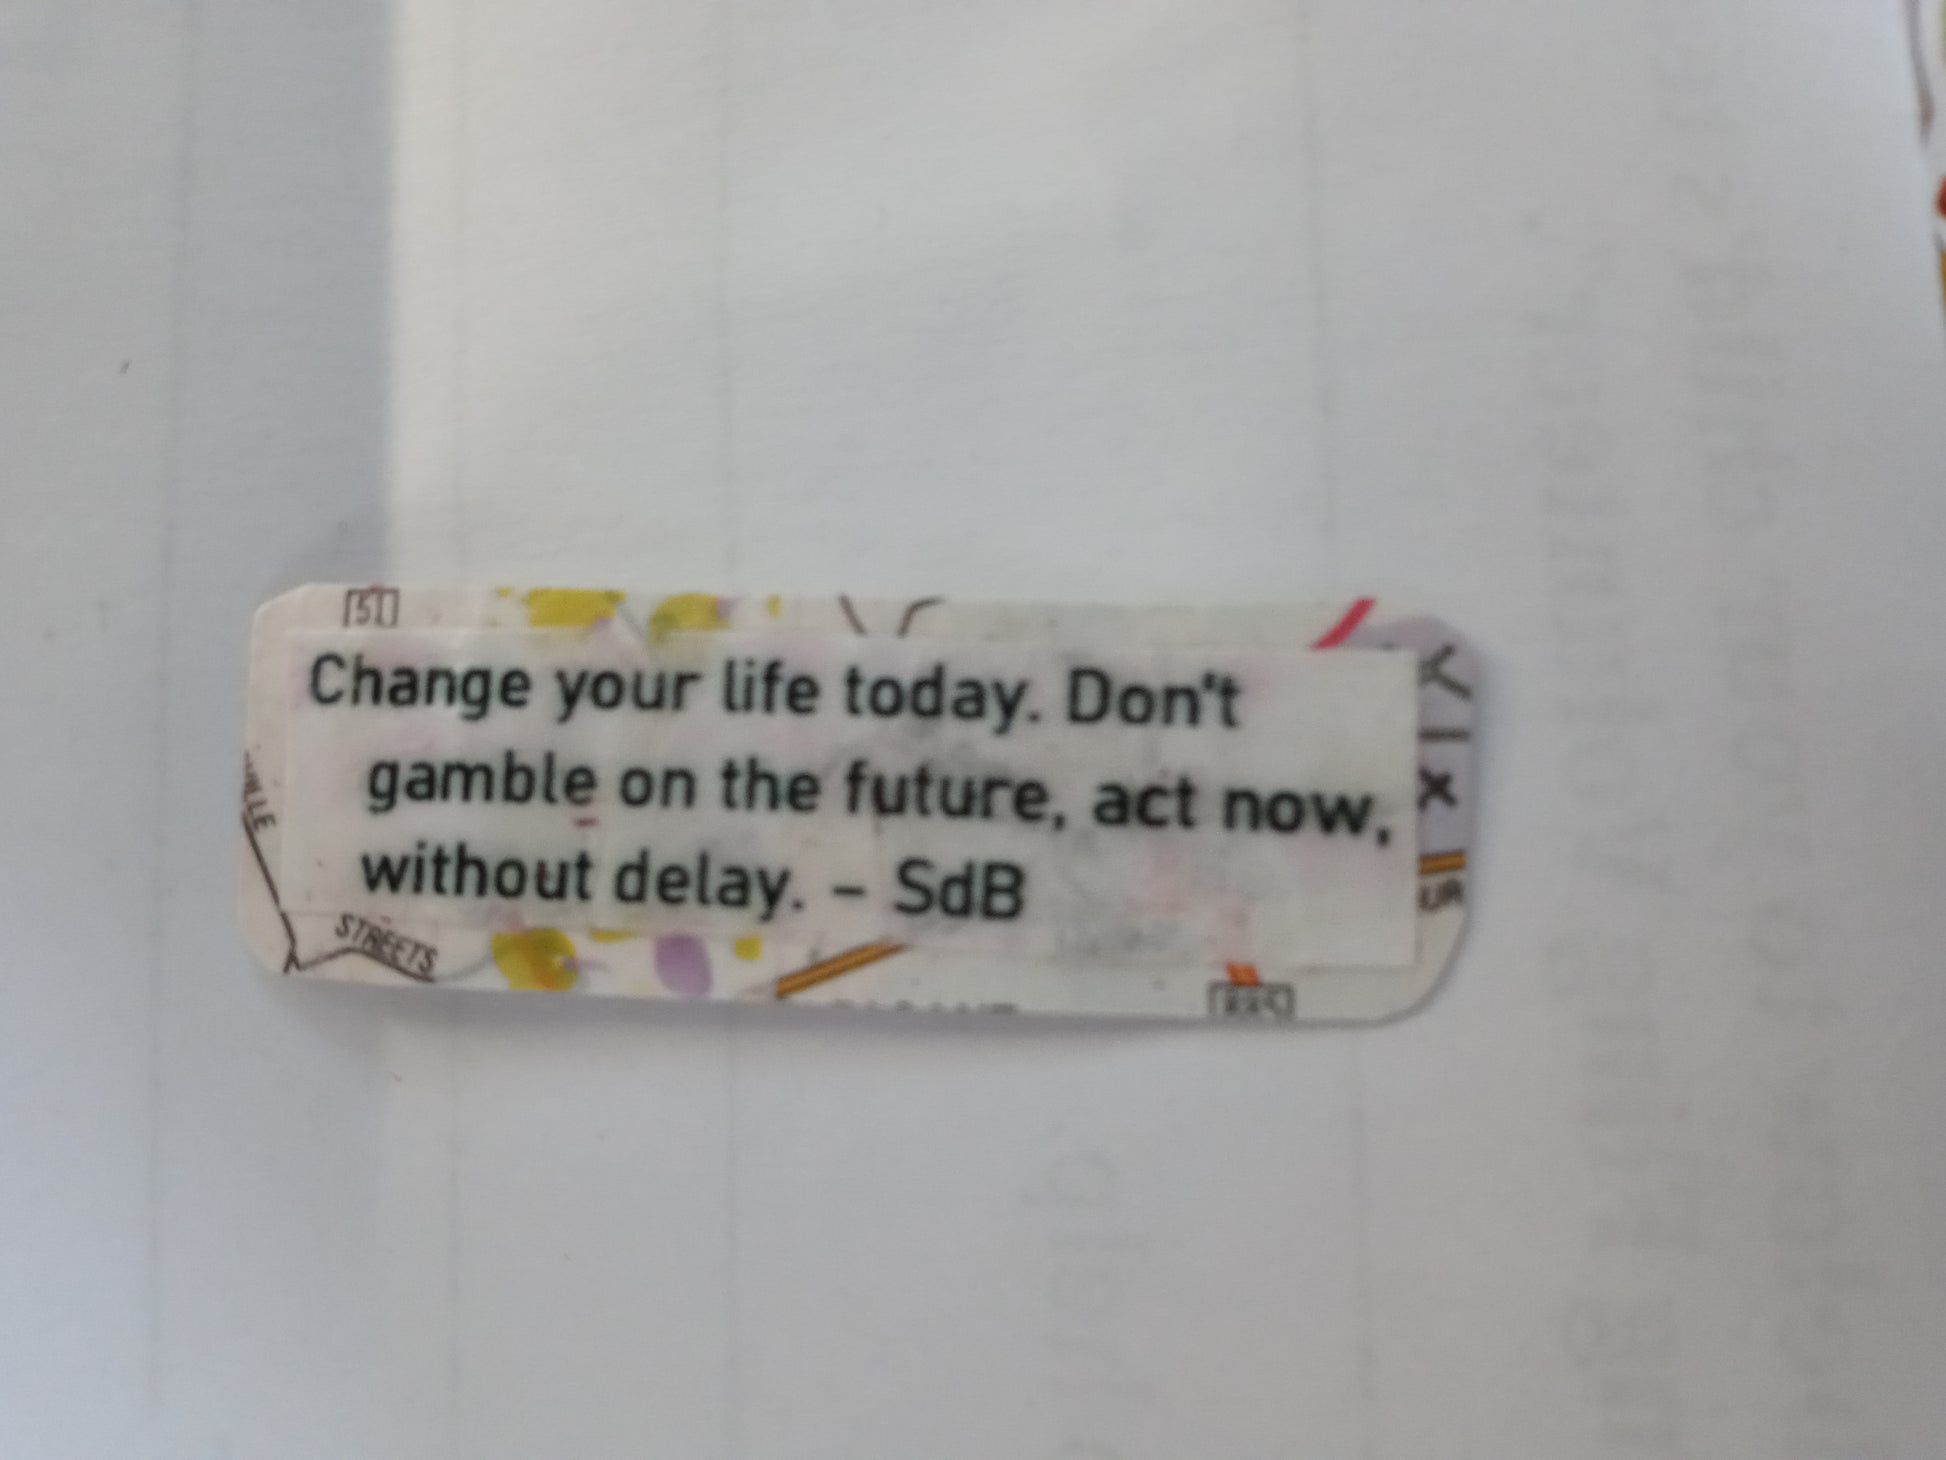 A small handmade sticker of rounded rectangular shape with a map style background. There is a quote overlaid on white paper that reads "Change your life today. Don't gamble on the future, act now, without delay. - SdB"